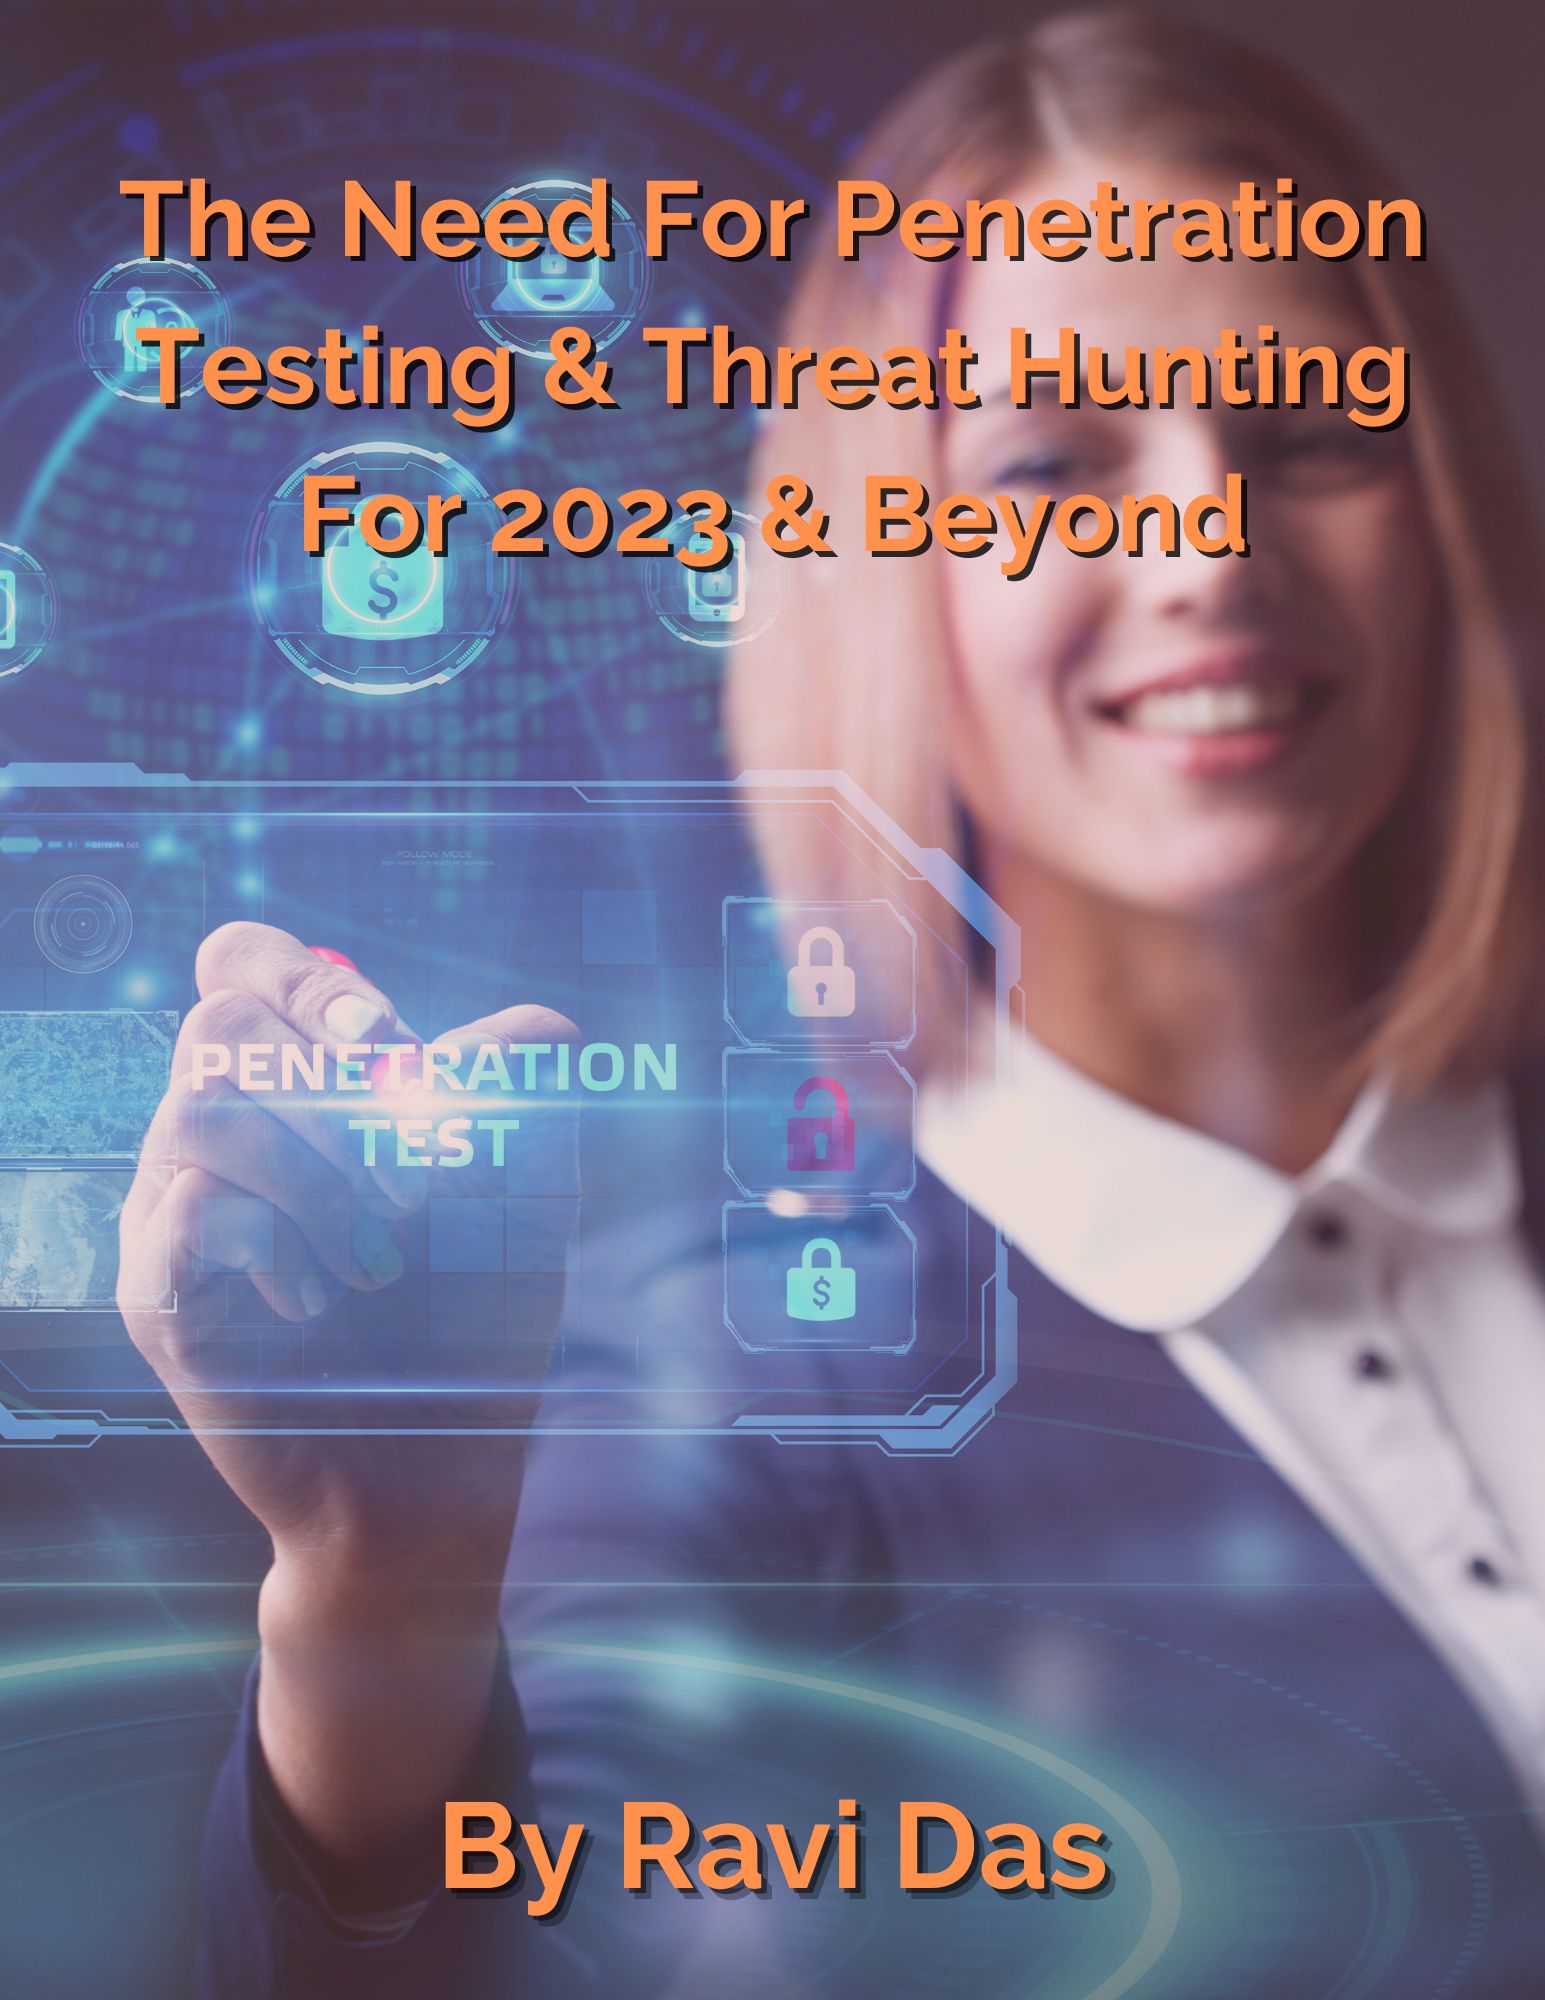 The Need For Penetration Testing & Threat Hunting For 2023 & Beyond